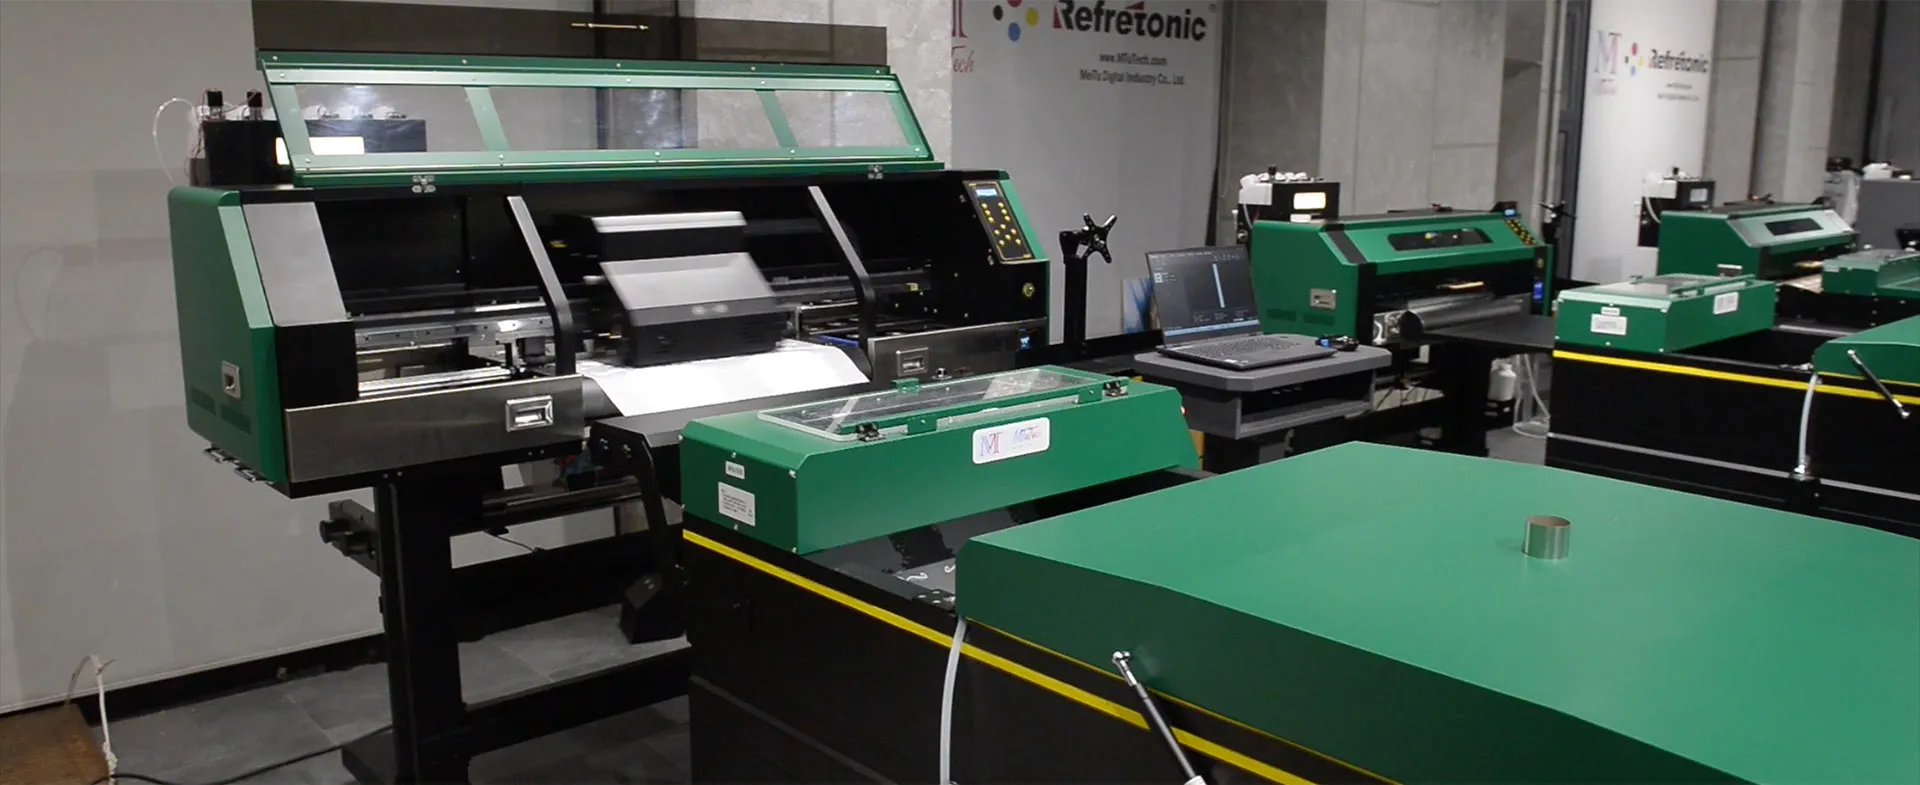 Xanté Sets Price and Ship Date for Its New Direct-to-Film Printer - Xanté